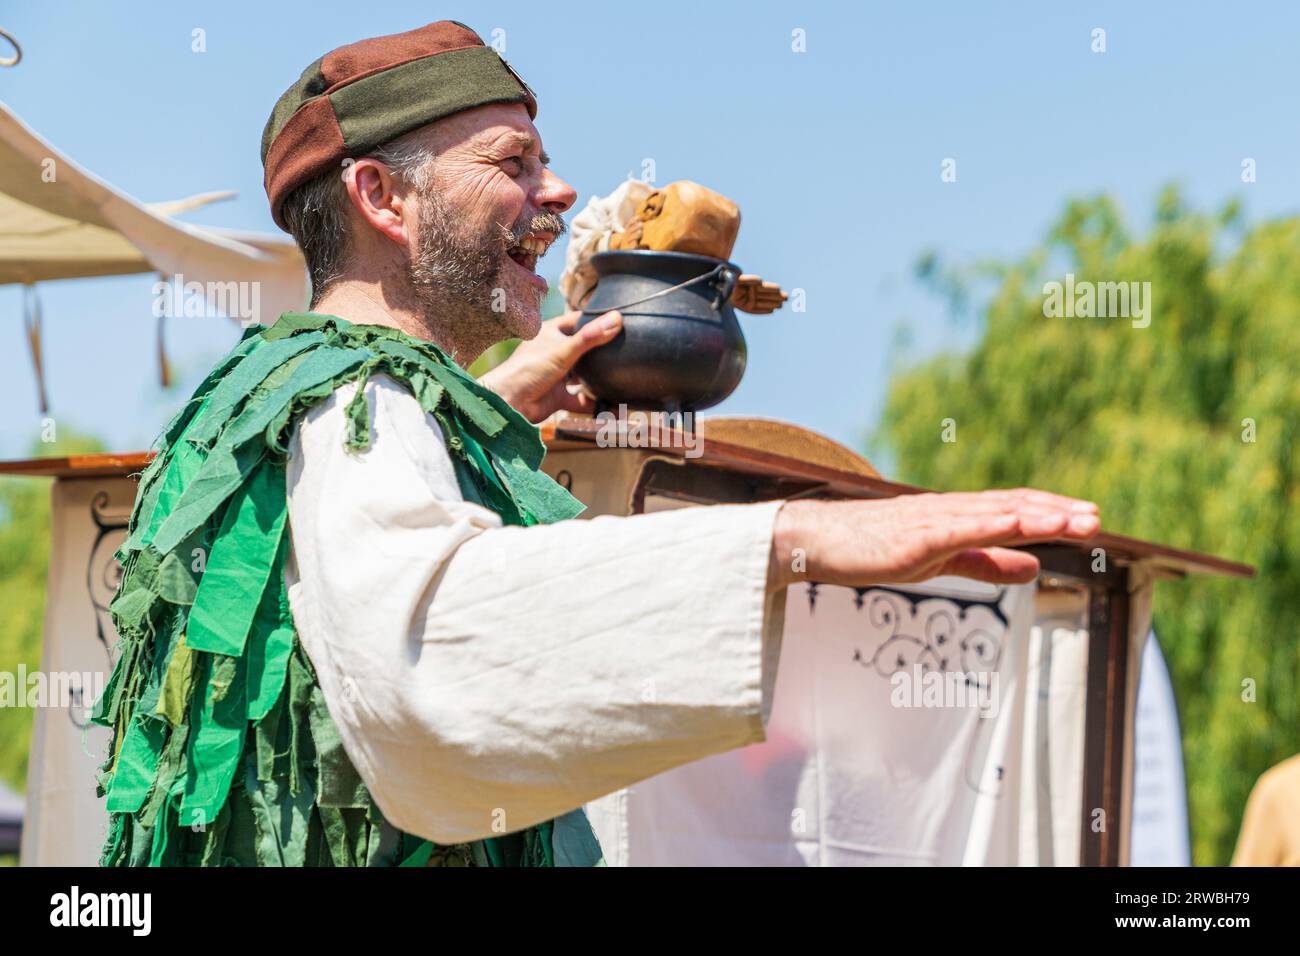 Medieval puppeteer in a green period costume, performing with puppet during a reenactment event at Sandwich town in kent in the summertime. Stock Photo